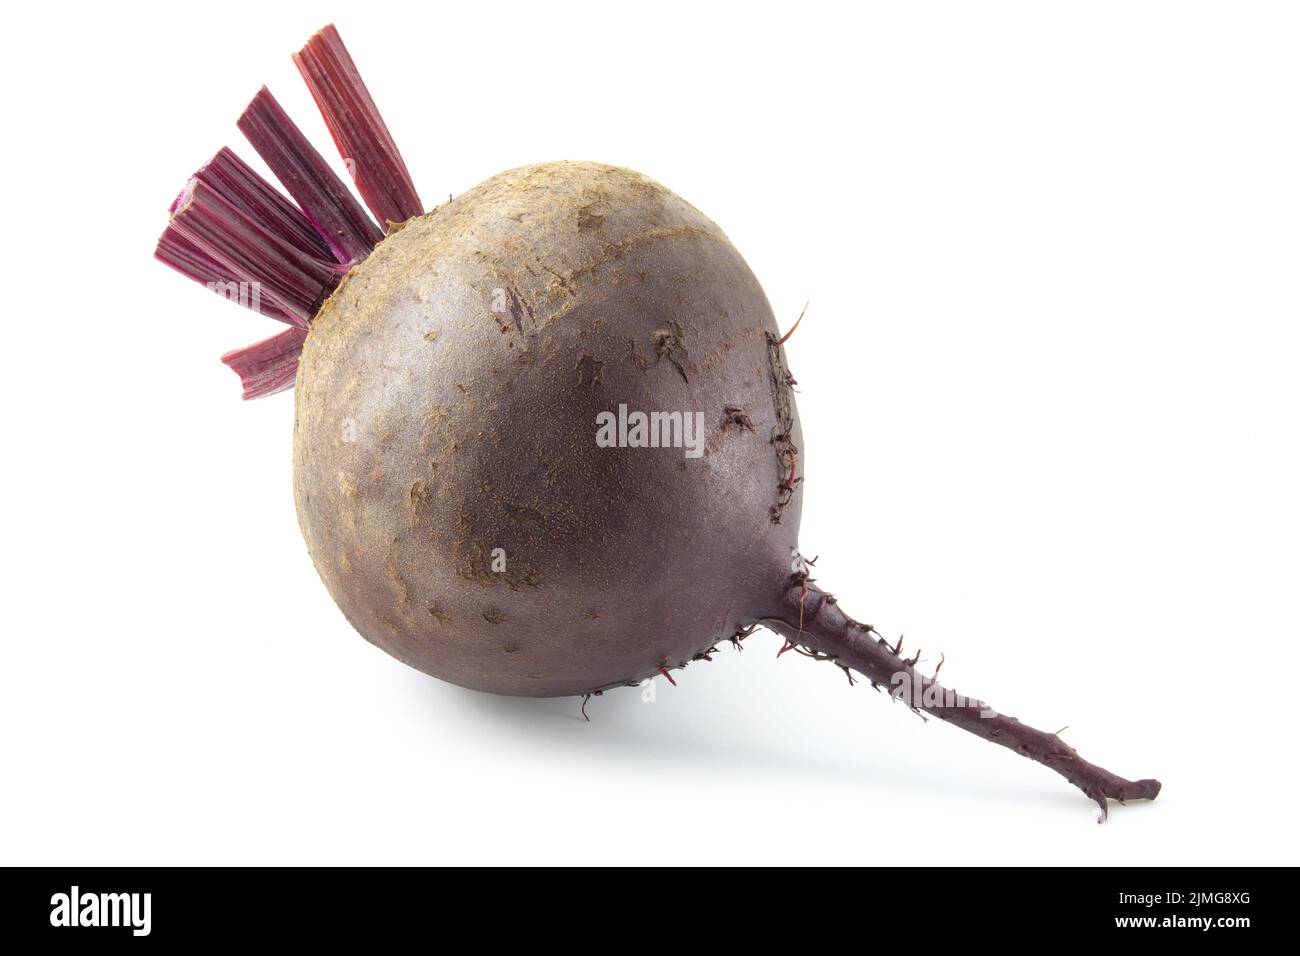 Red table beets isolated on white background. Stock Photo